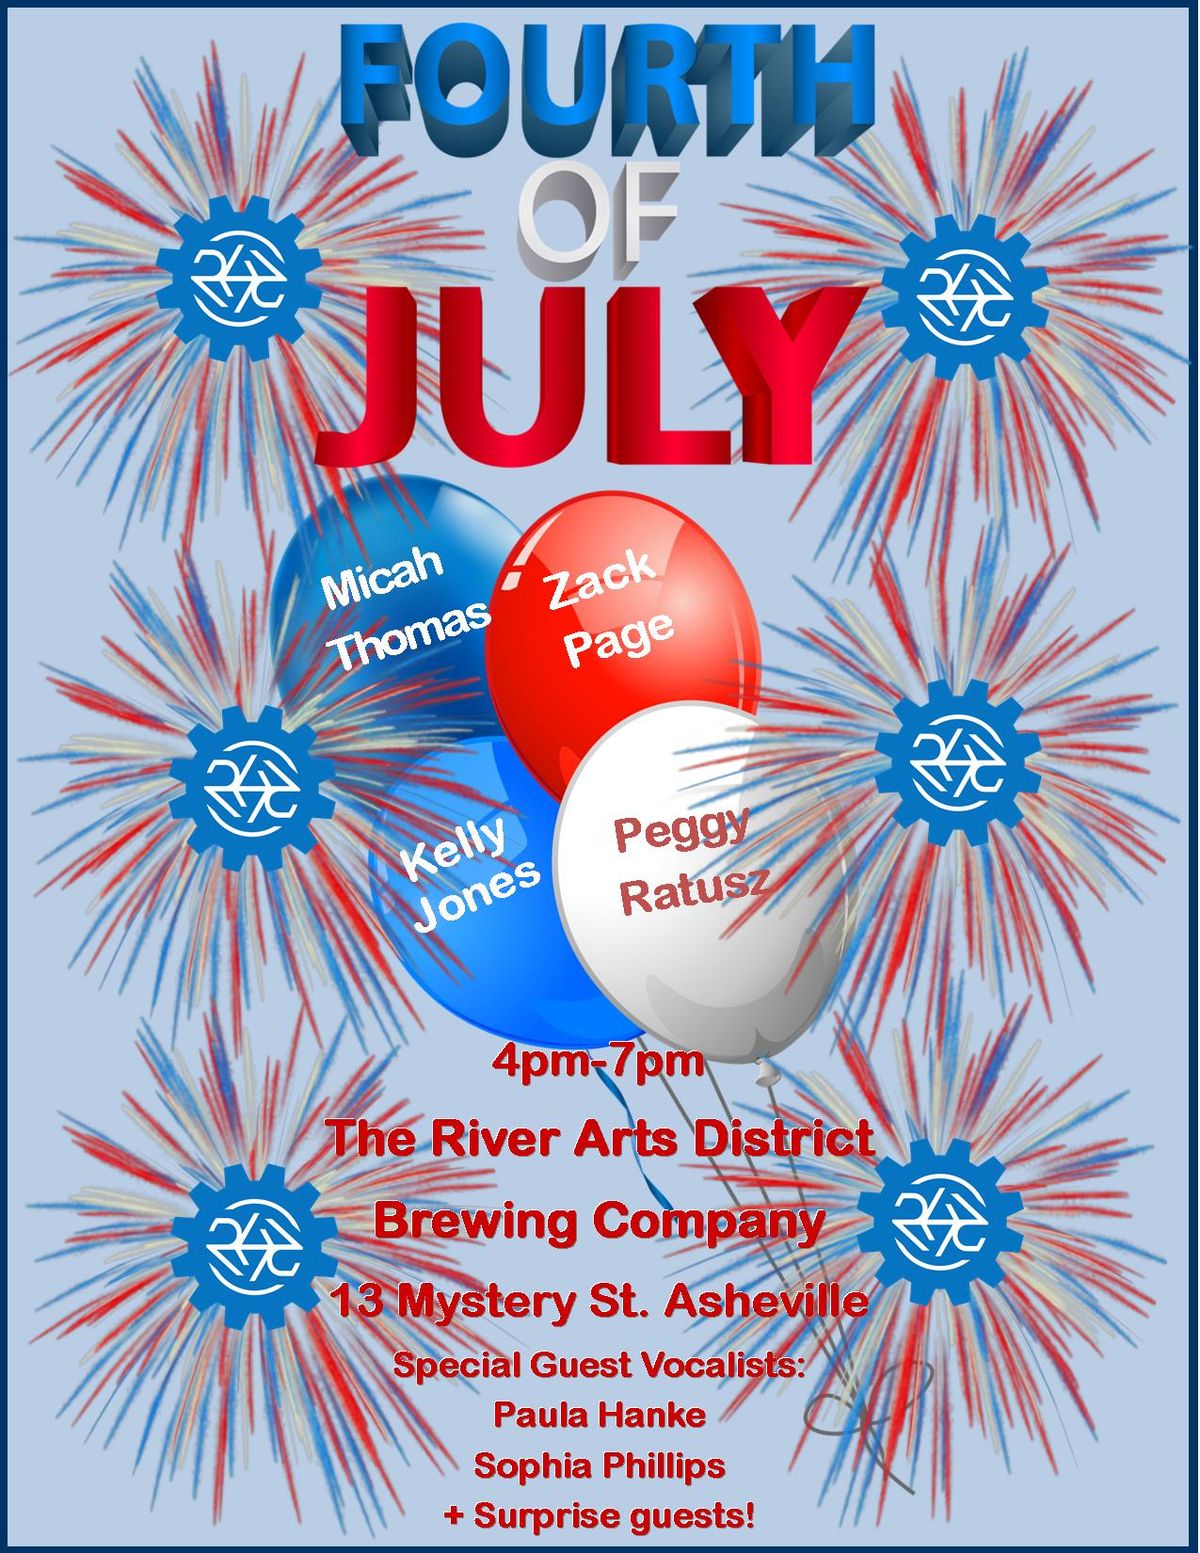 July 4th! 4PM-7PM! Peggy Ratusz, Kelly Jones, Zack Page & Micah Thomas + Special Guests!